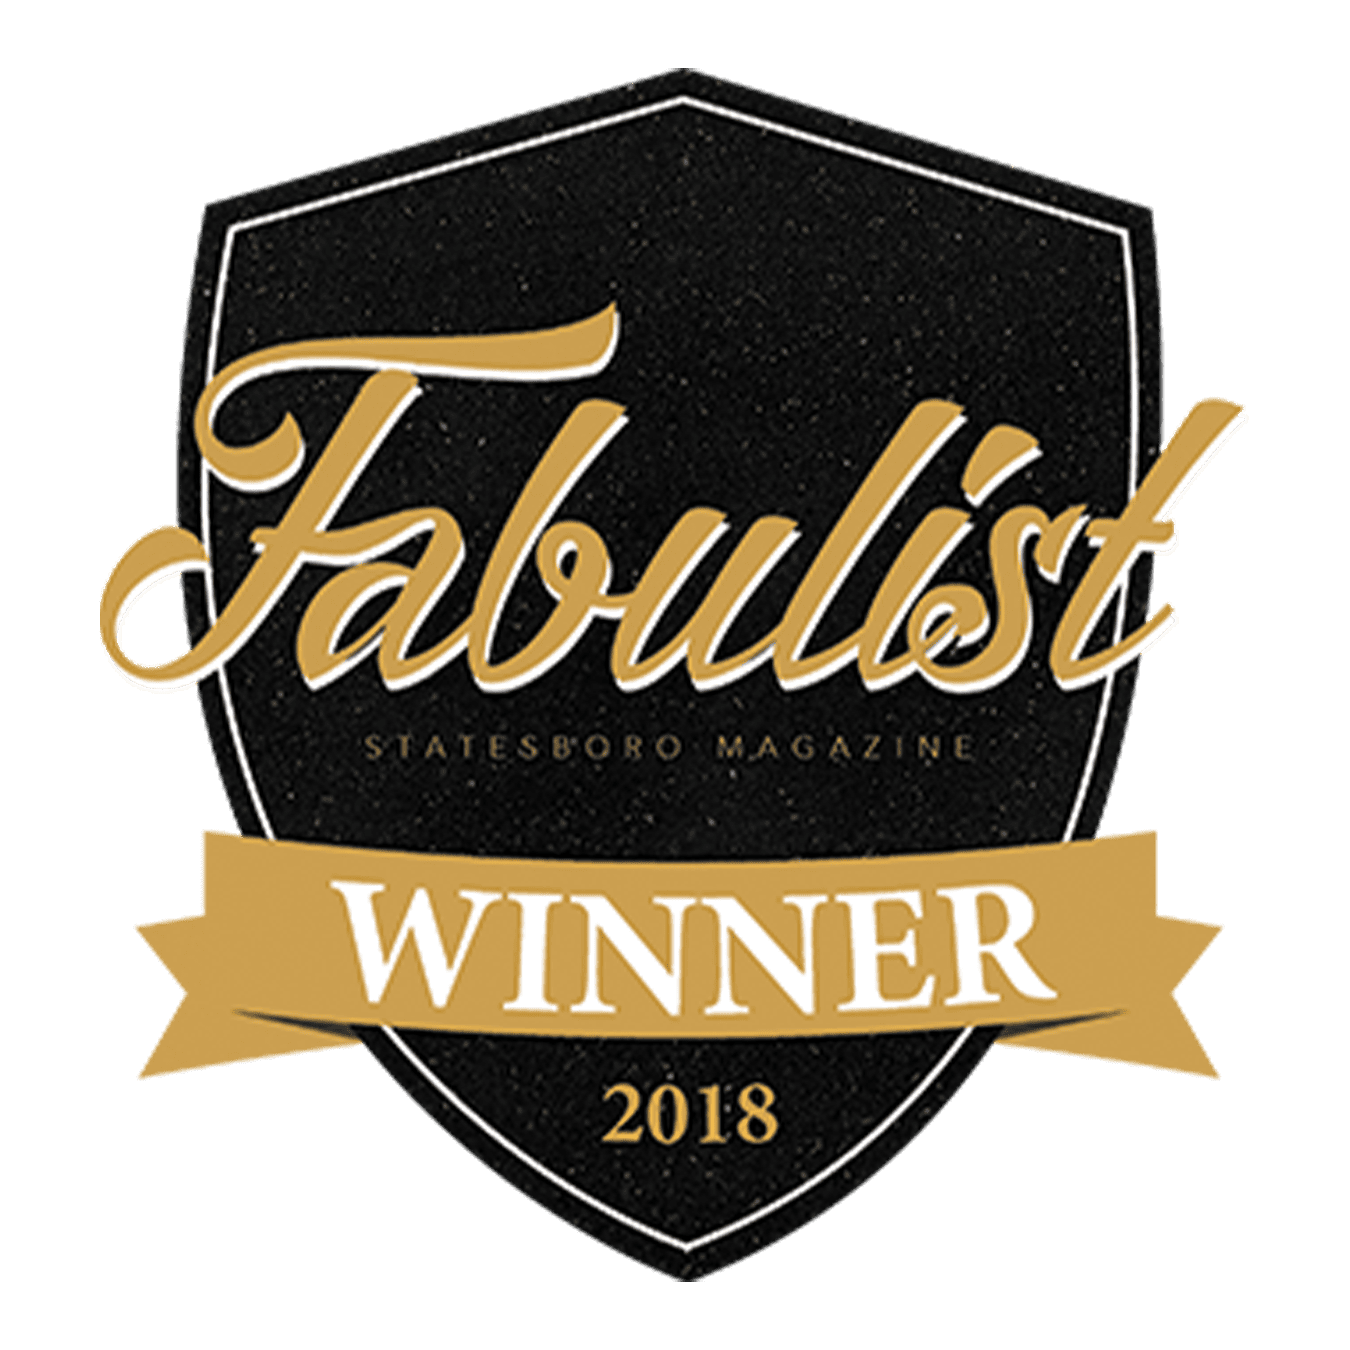 A black shield with gold & white writing for the 2018 Fabulist Magazine Winner emblem is displayed.